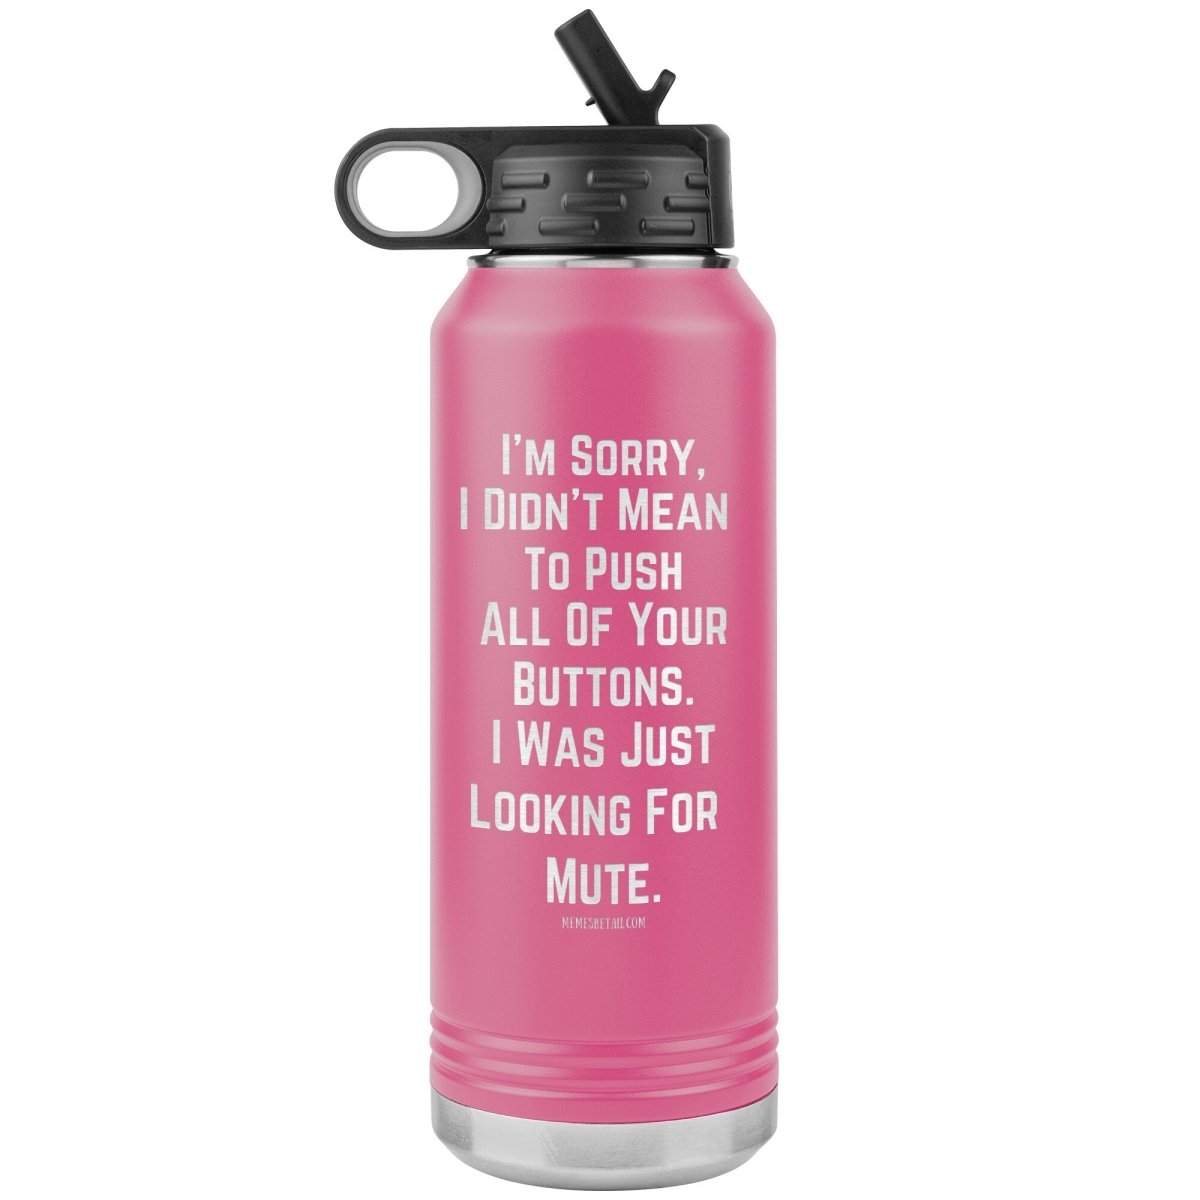 I’m sorry, I didn’t mean to push all your buttons, I was just looking for mute 32 oz water tumbler, Pink - MemesRetail.com